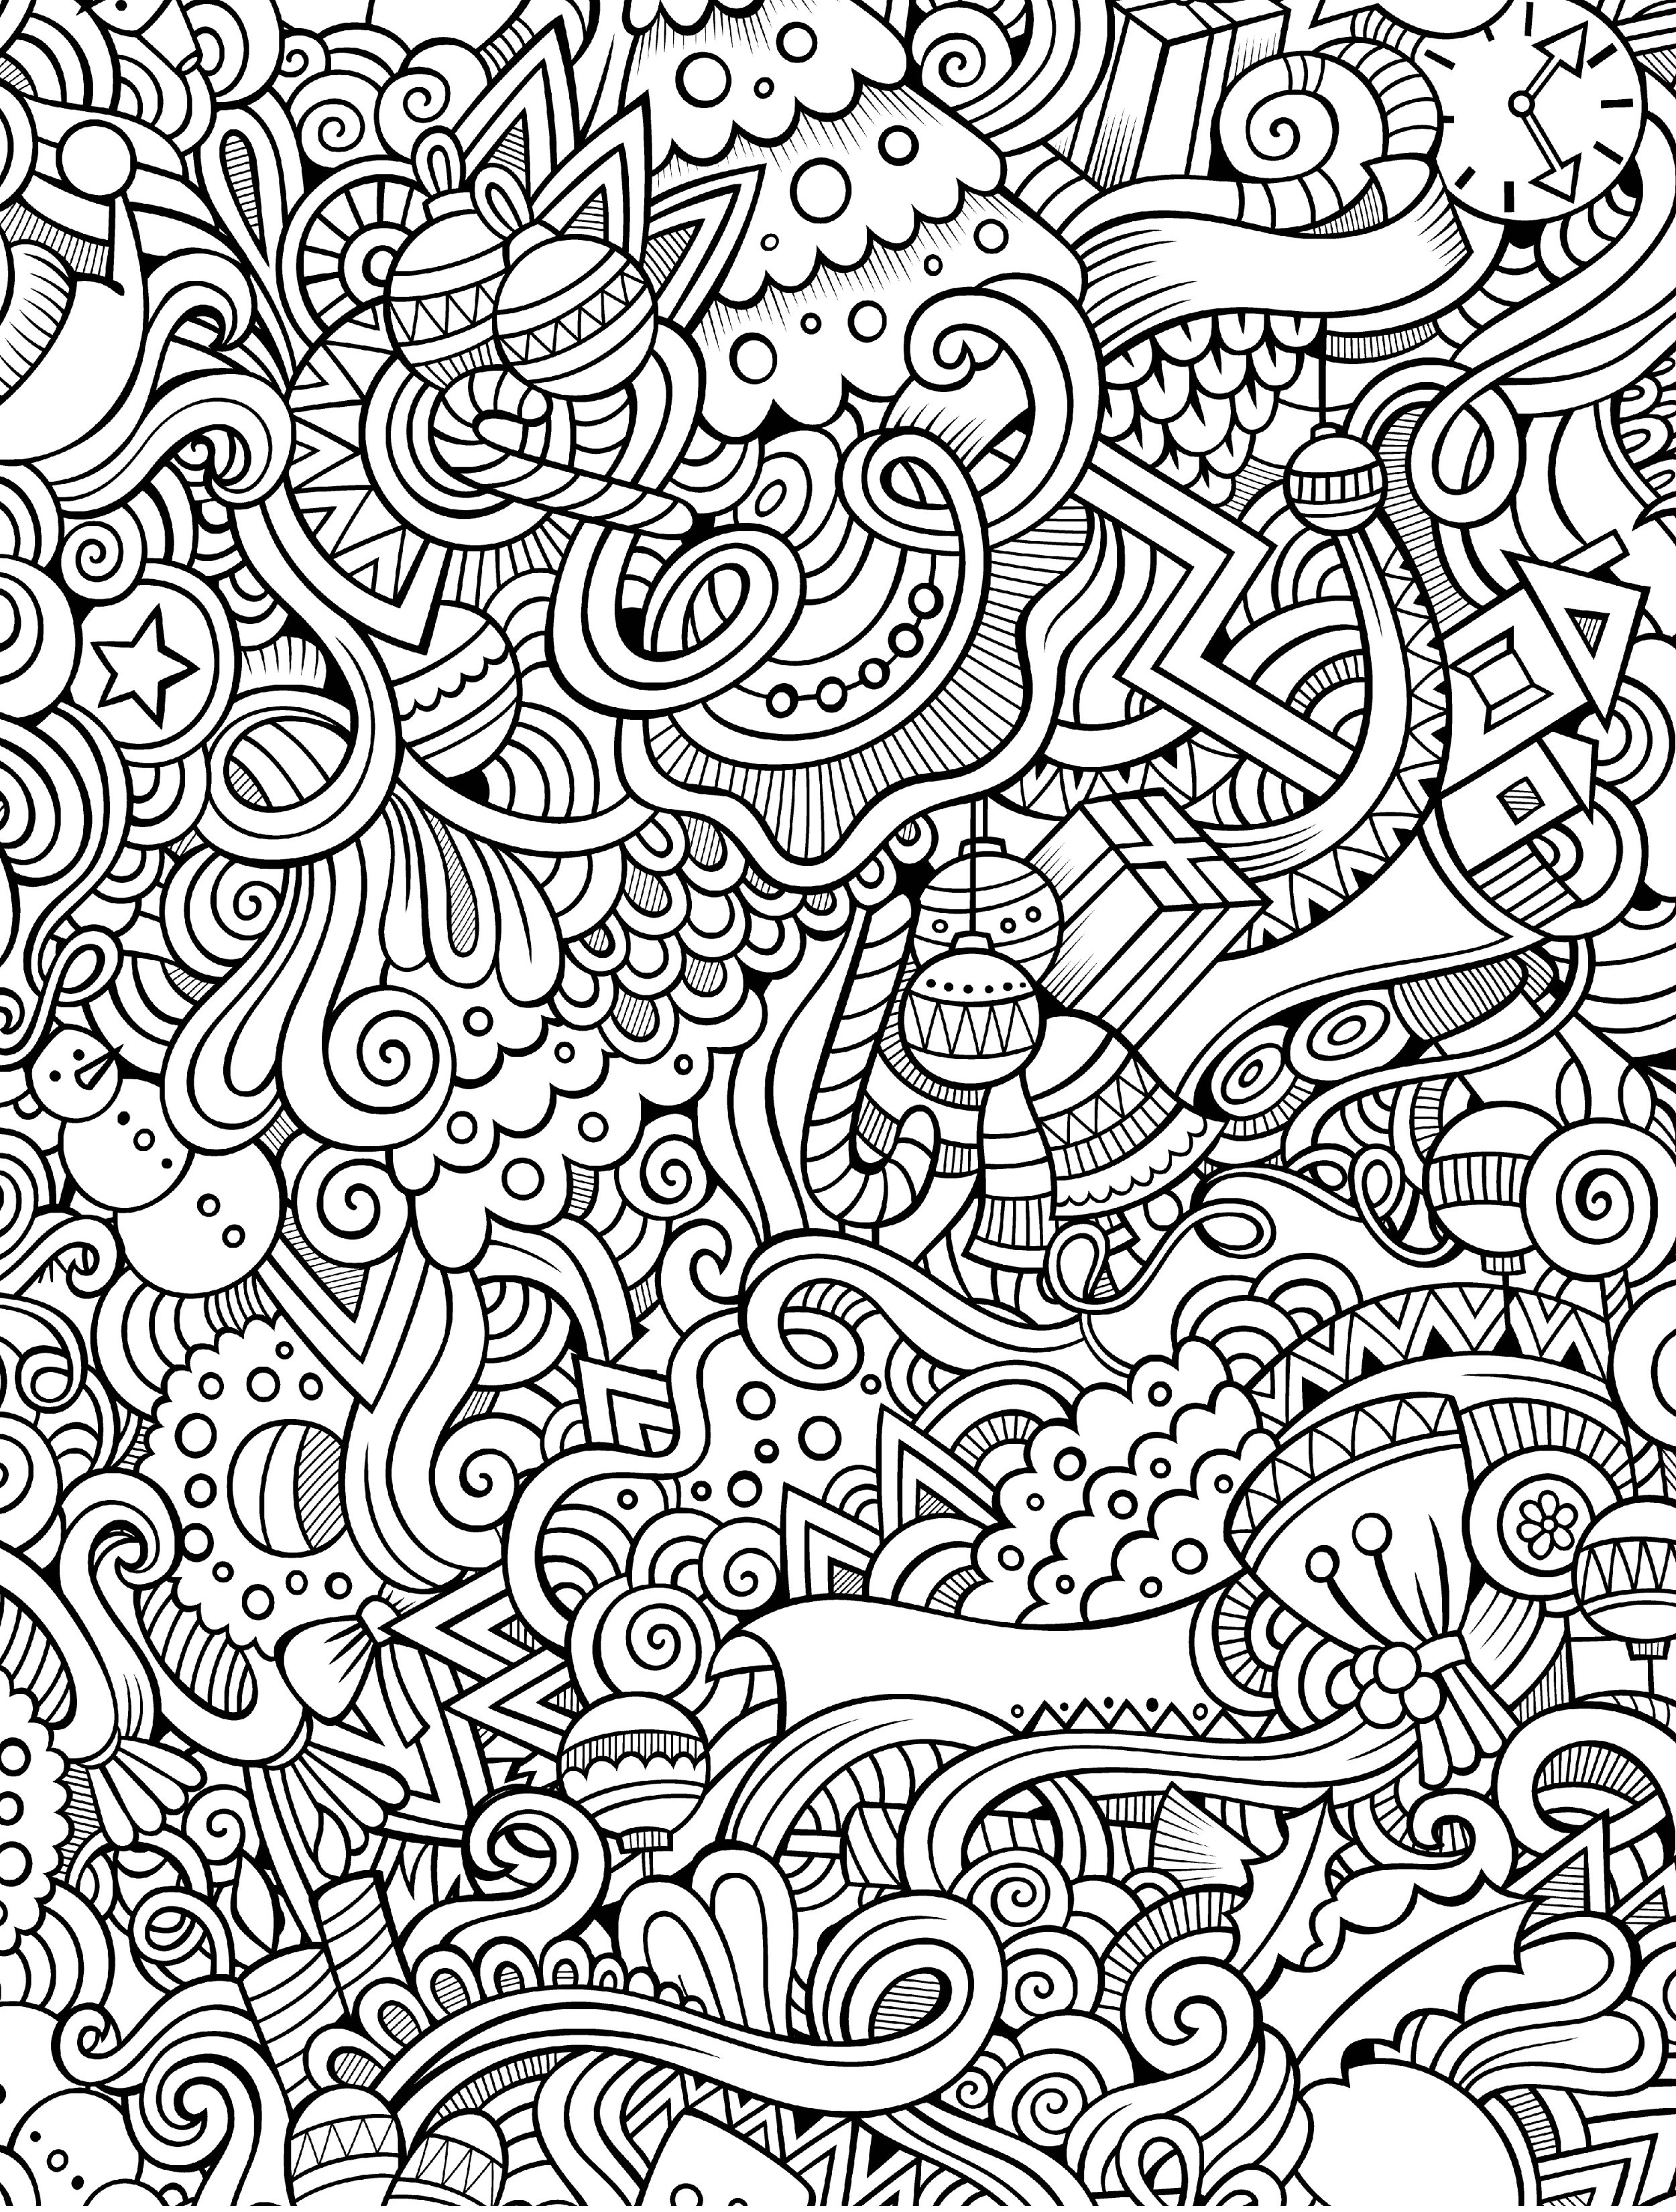 Free Pdf Coloring Pages For Adults
 10 Free Printable Holiday Adult Coloring Pages